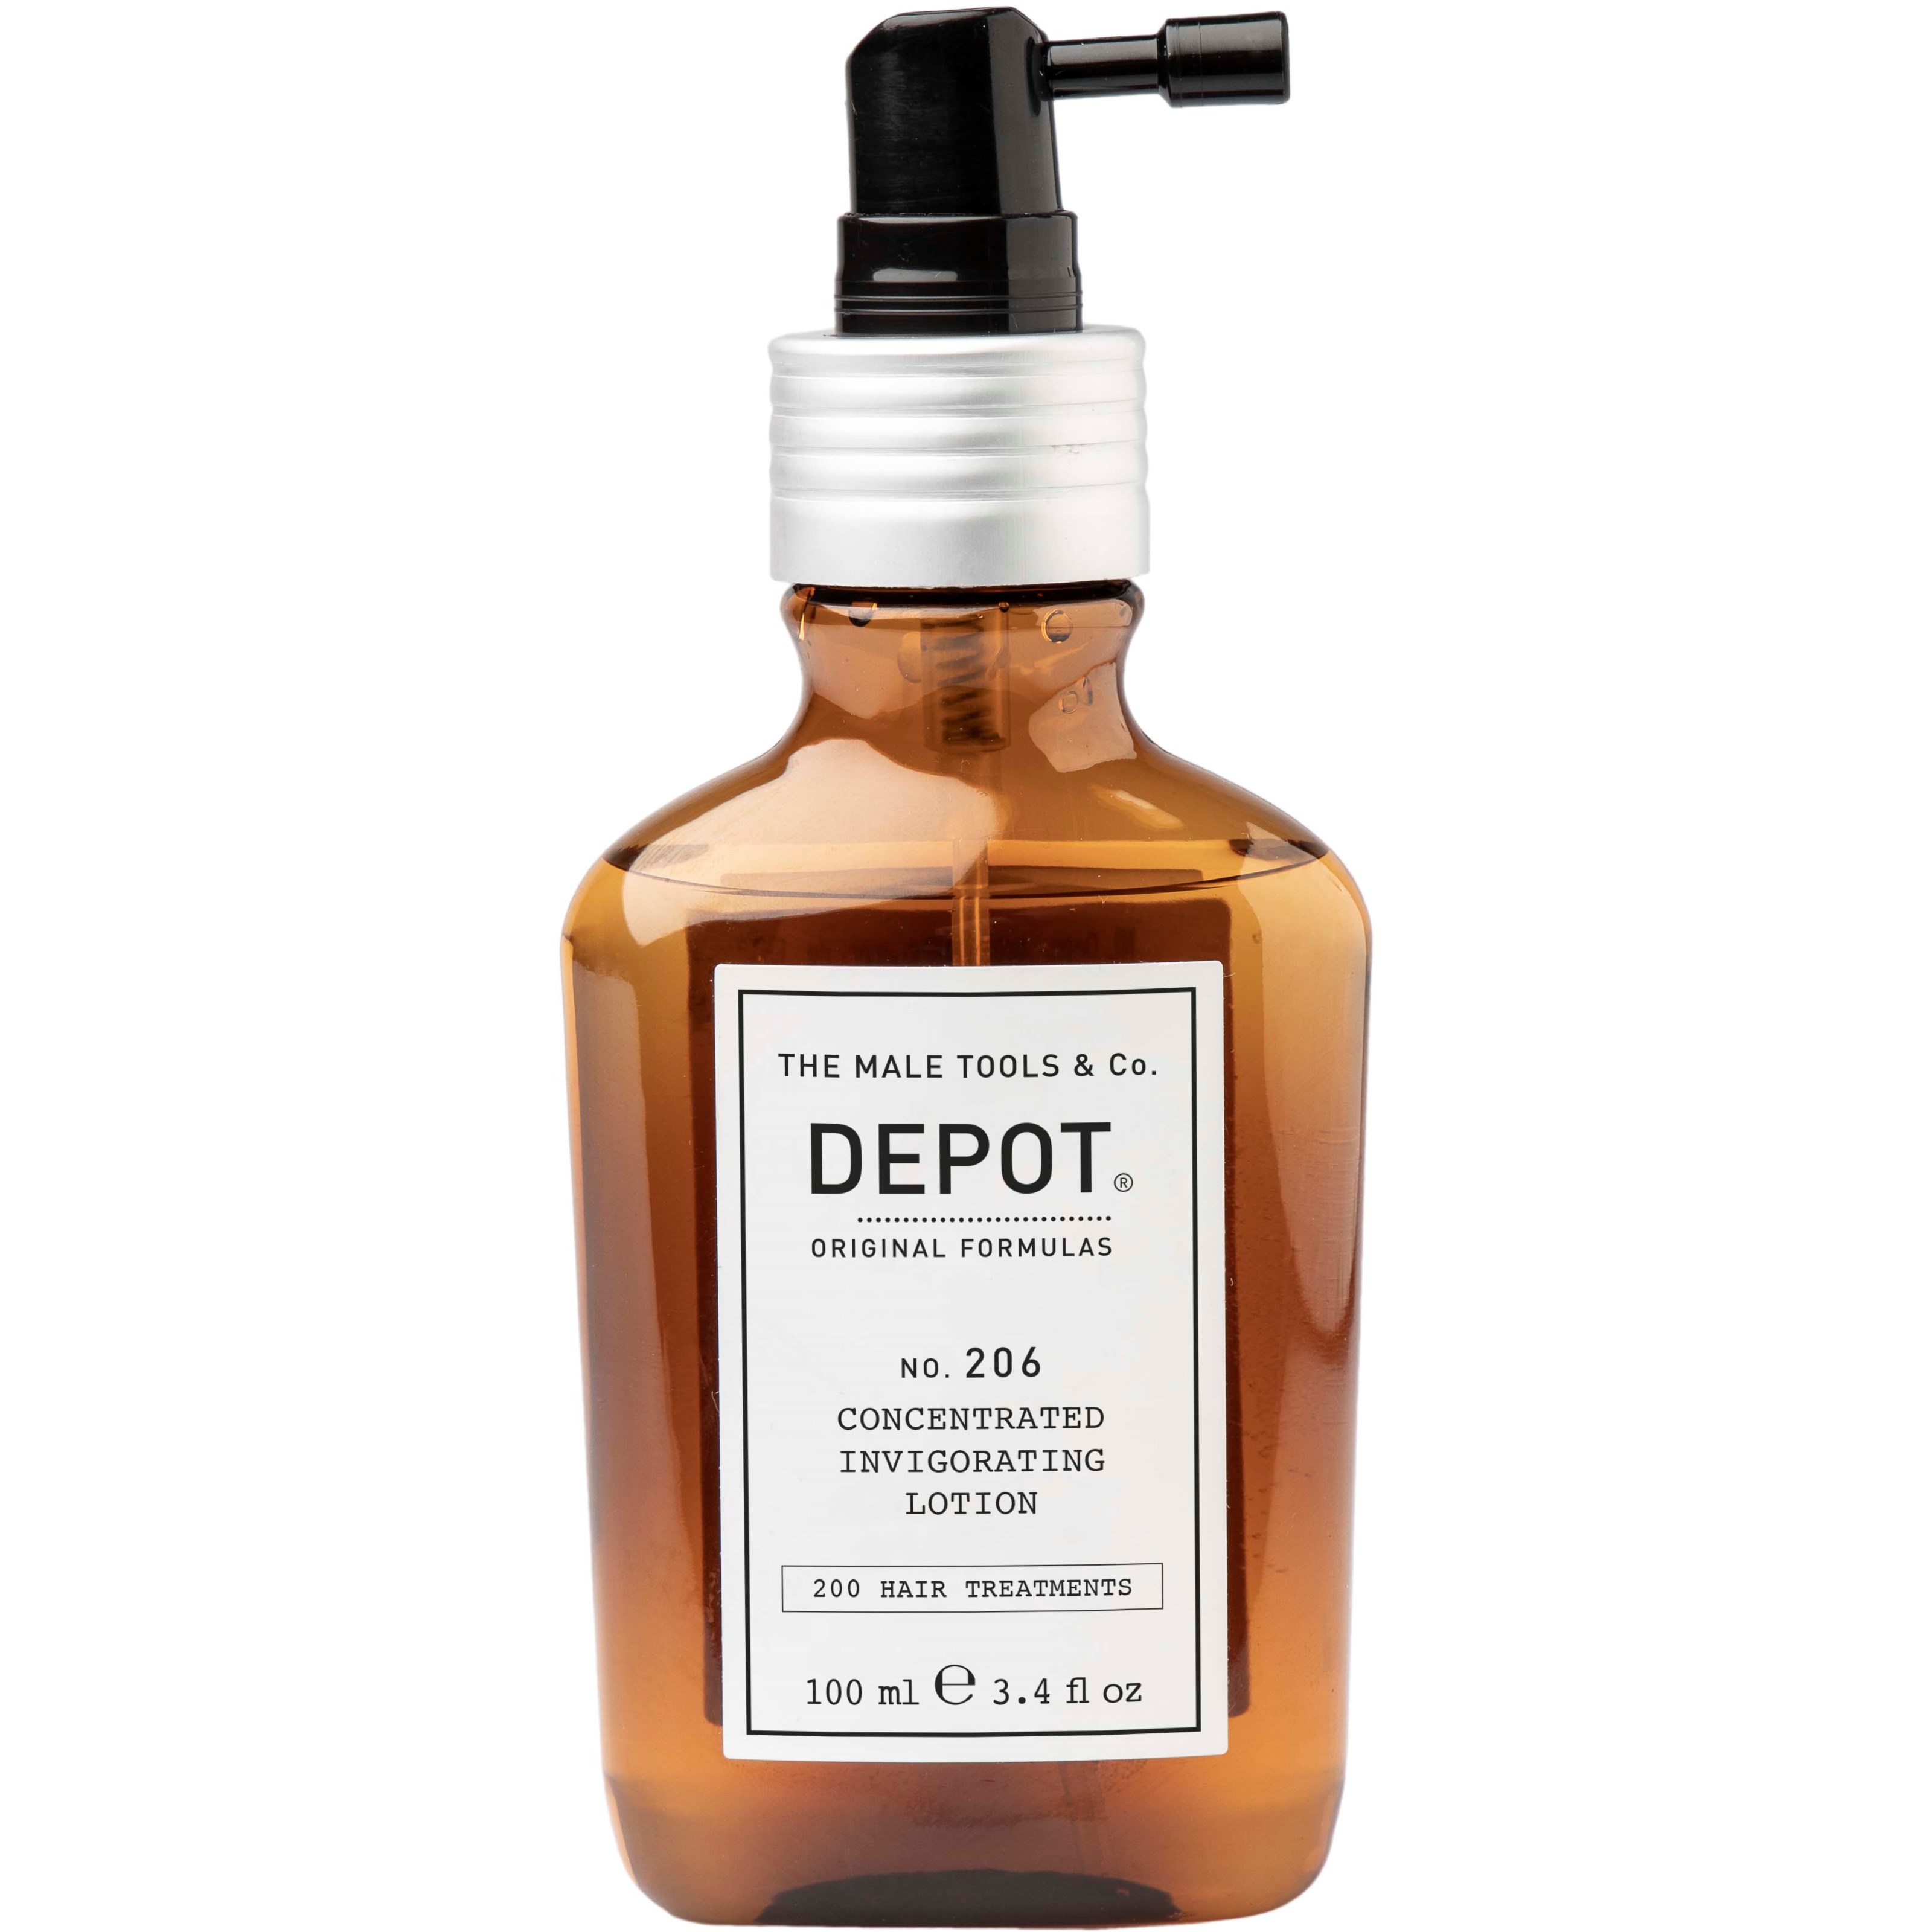 DEPOT MALE TOOLS No. 206 Concentrated Invigorating Lotion 100 ml